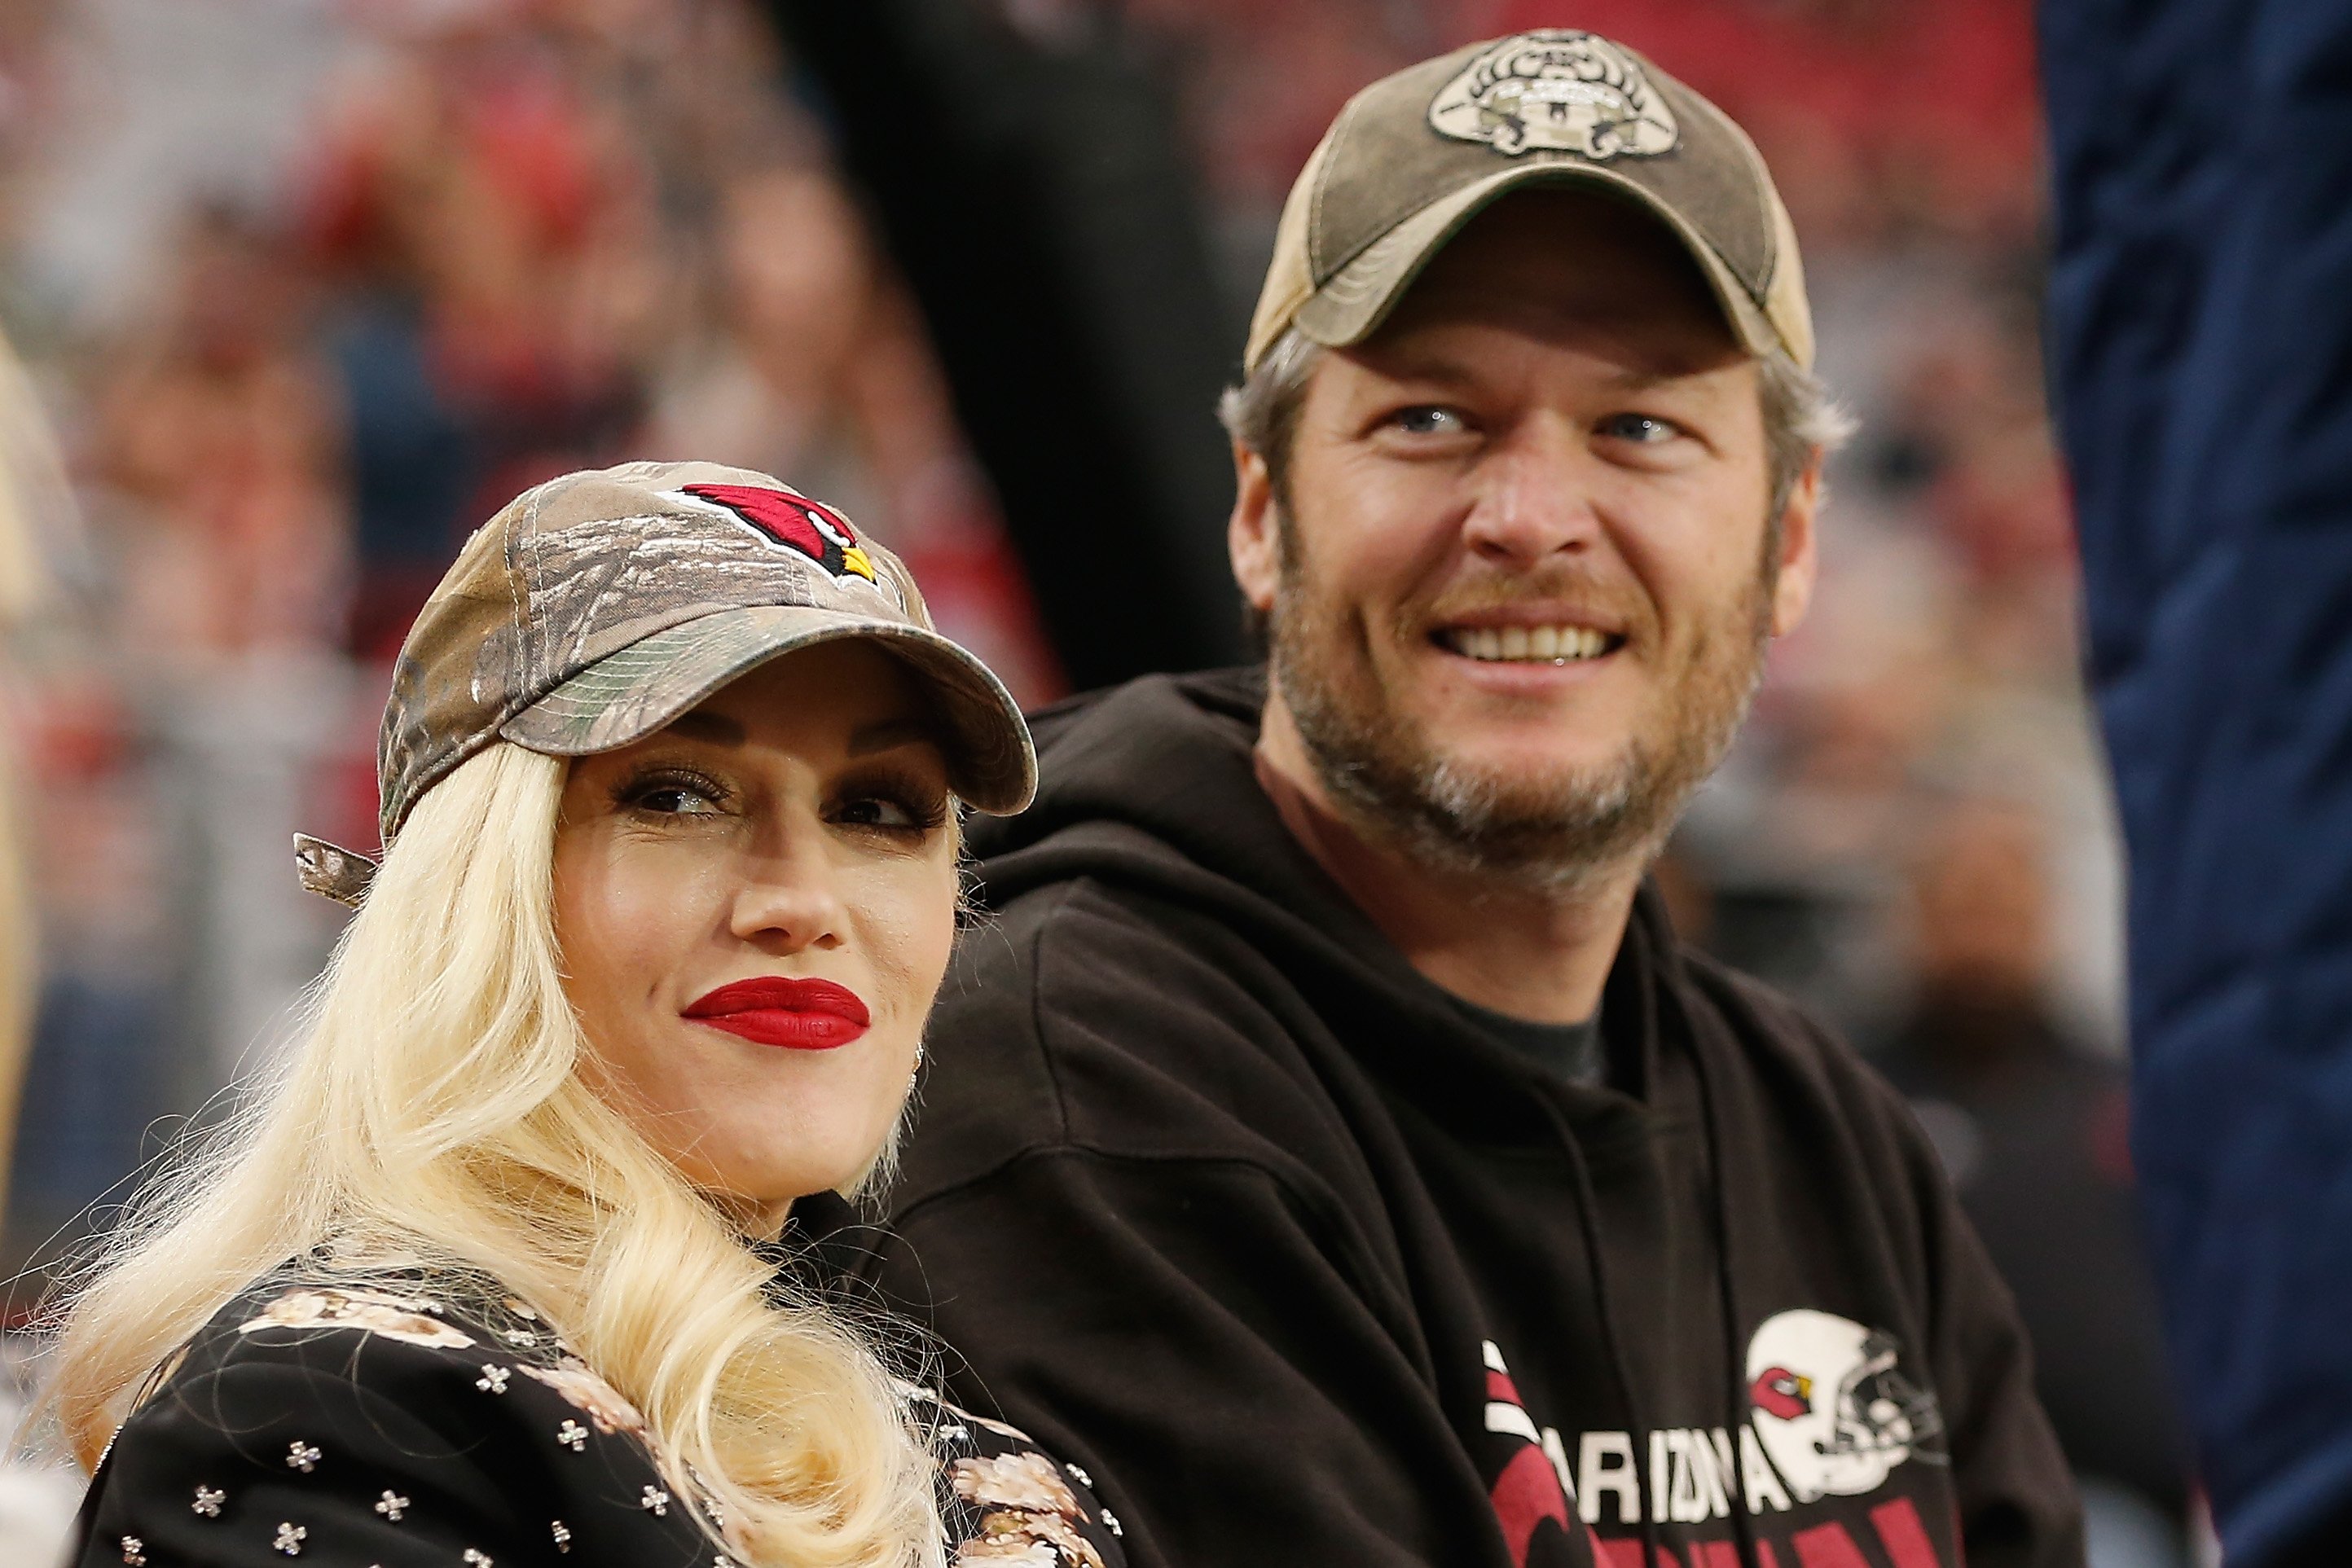 Gwen Stefani and Blake Shelton at an NFL game at the University of Phoenix Stadium on December 27, 2015, in Glendale, Arizona | Source: Getty Images